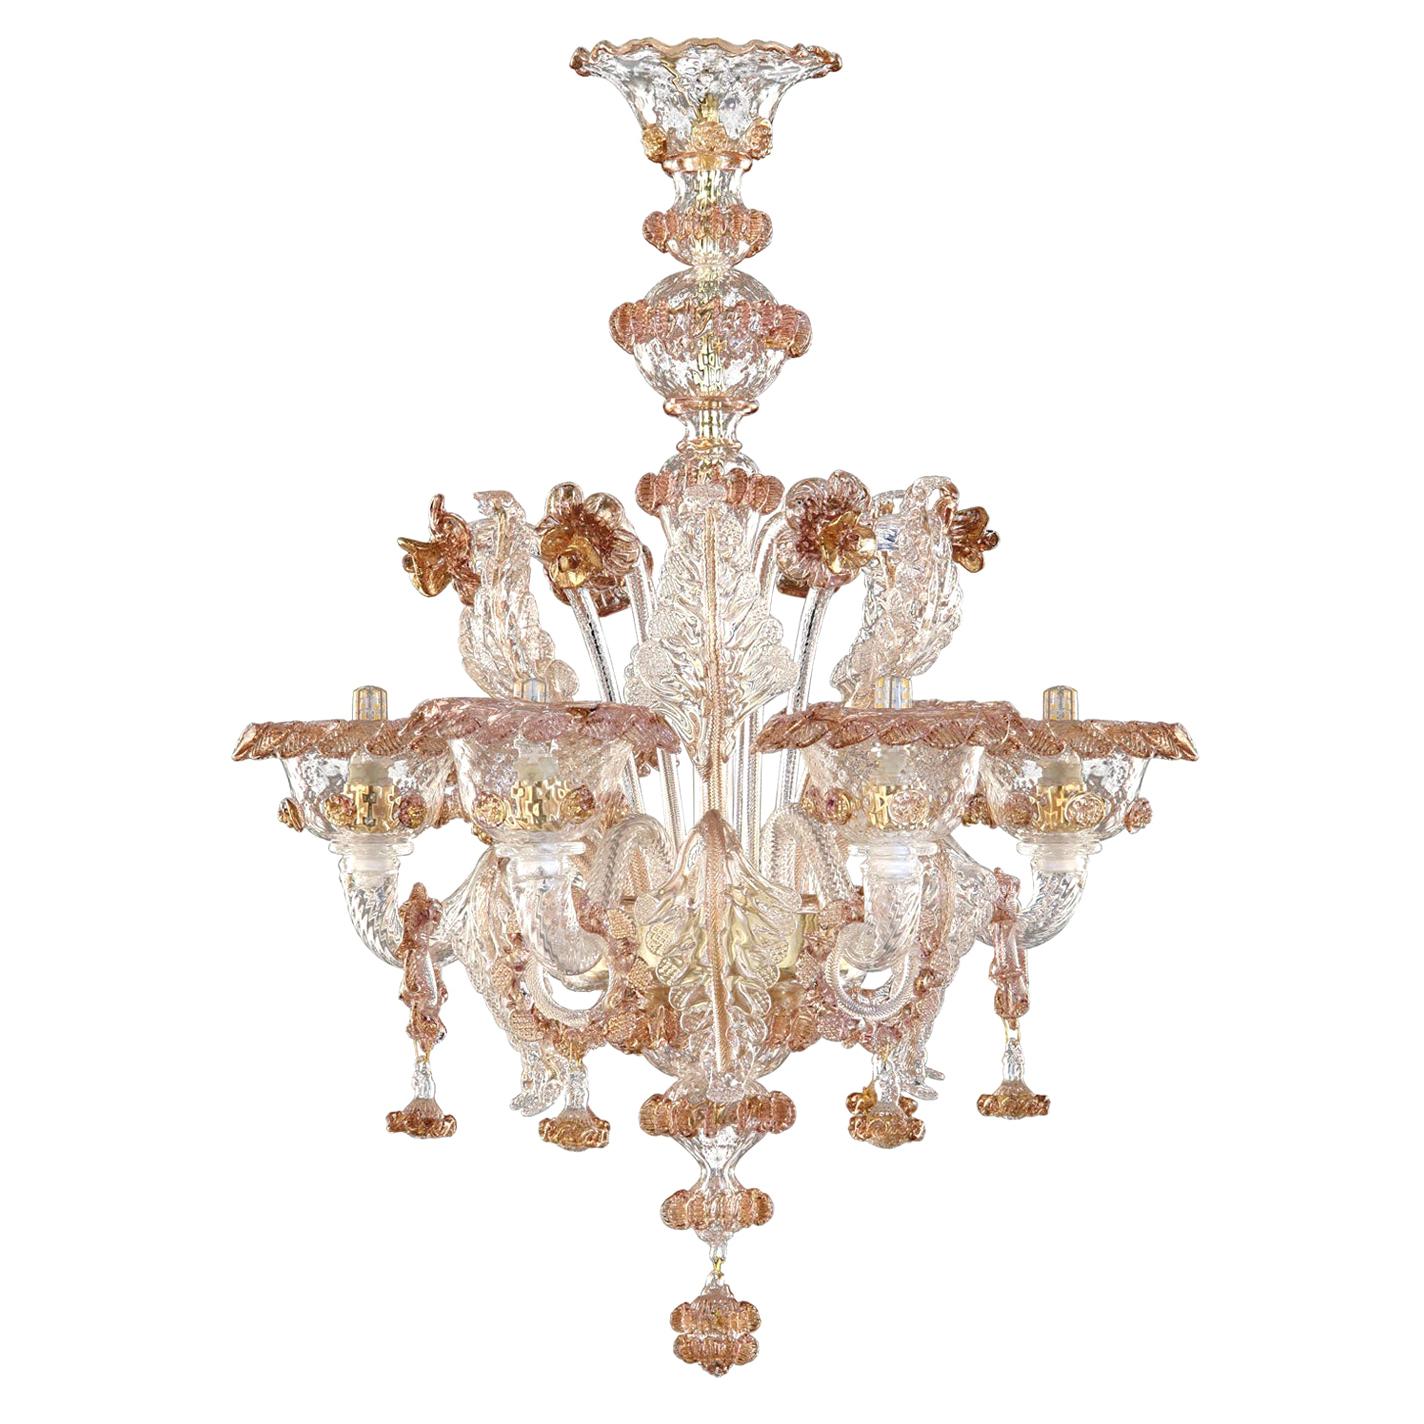 Artistic Rich Chandelier, 6 Arms Clear Murano Glass, Color Details by Multiforme